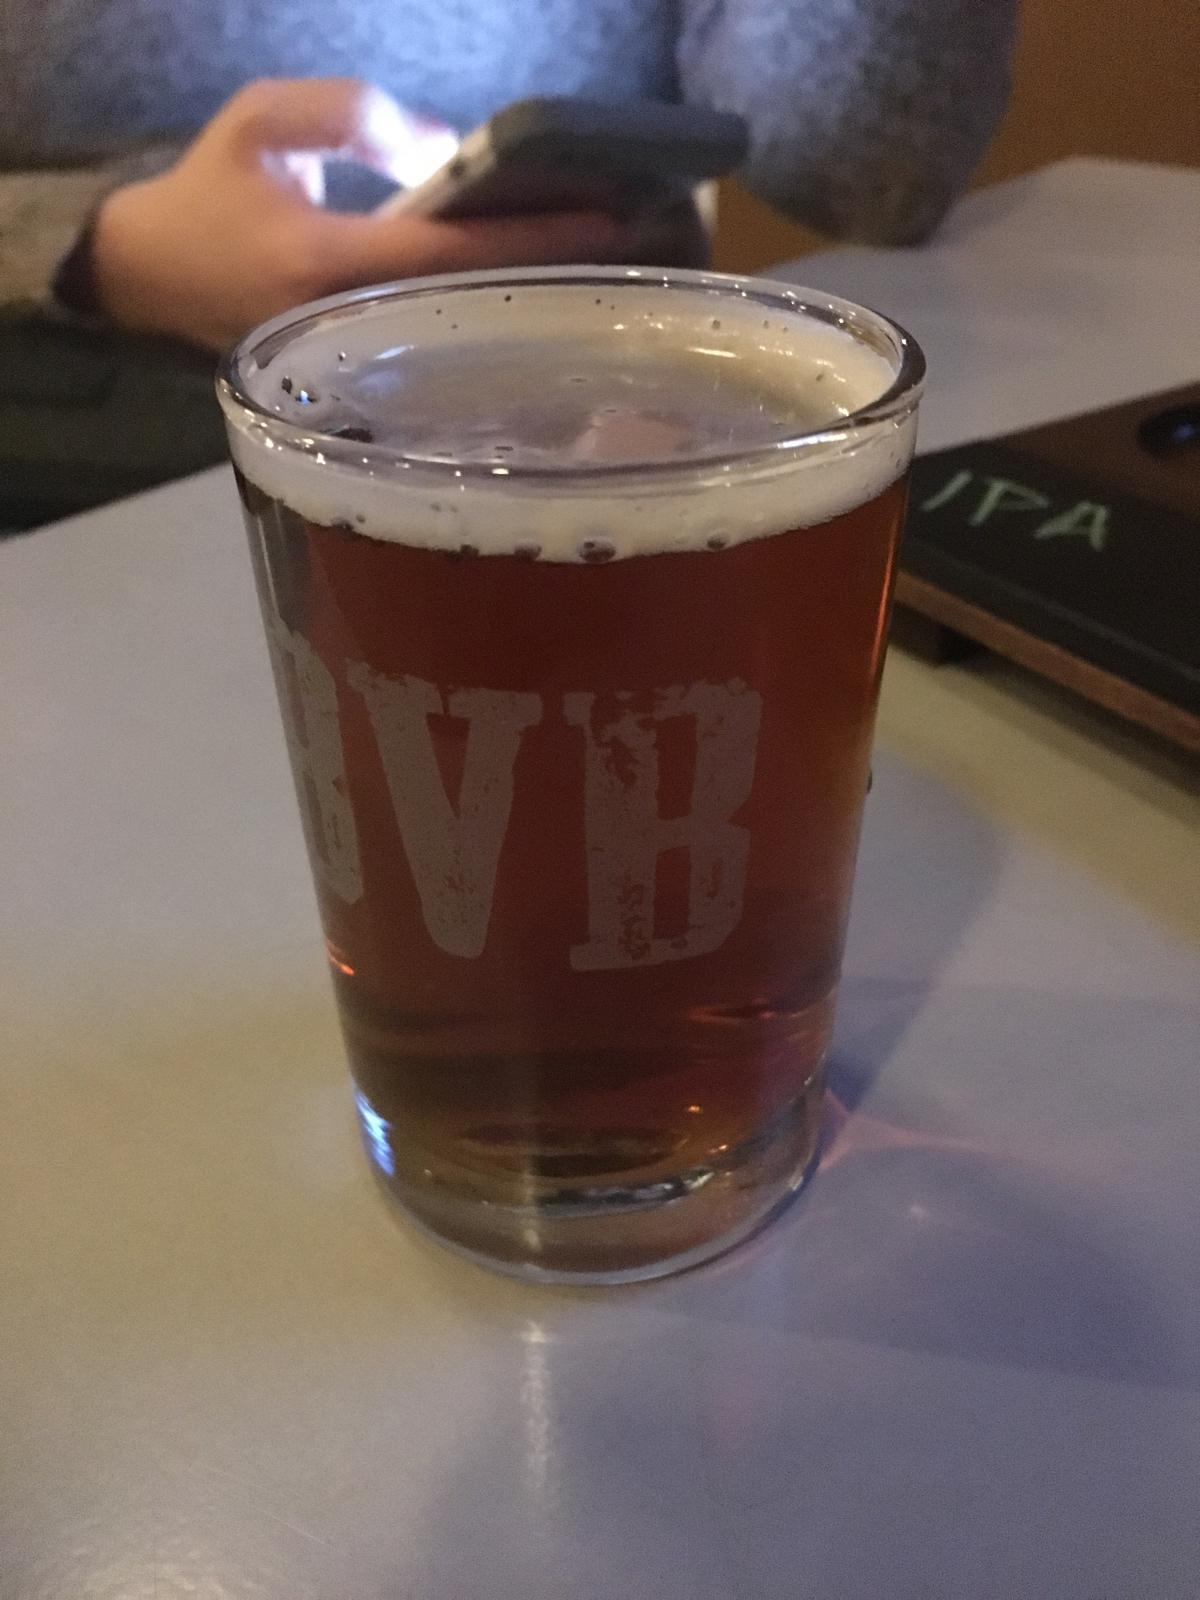 Boone Valley IPA